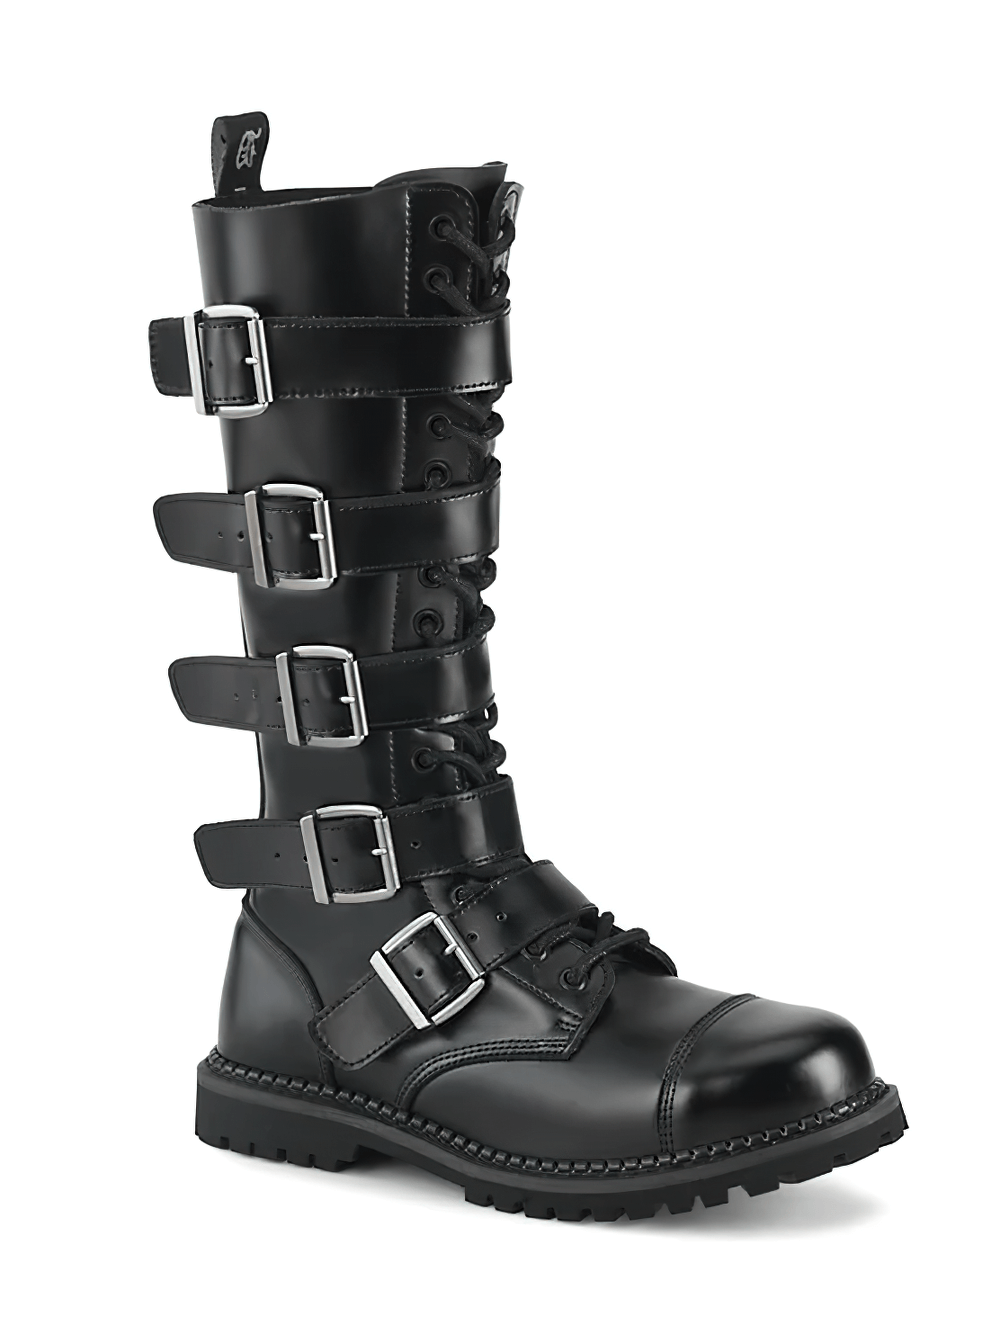 DEMONIA Biker Leather Knee Boots with Steel Toe and Buckles